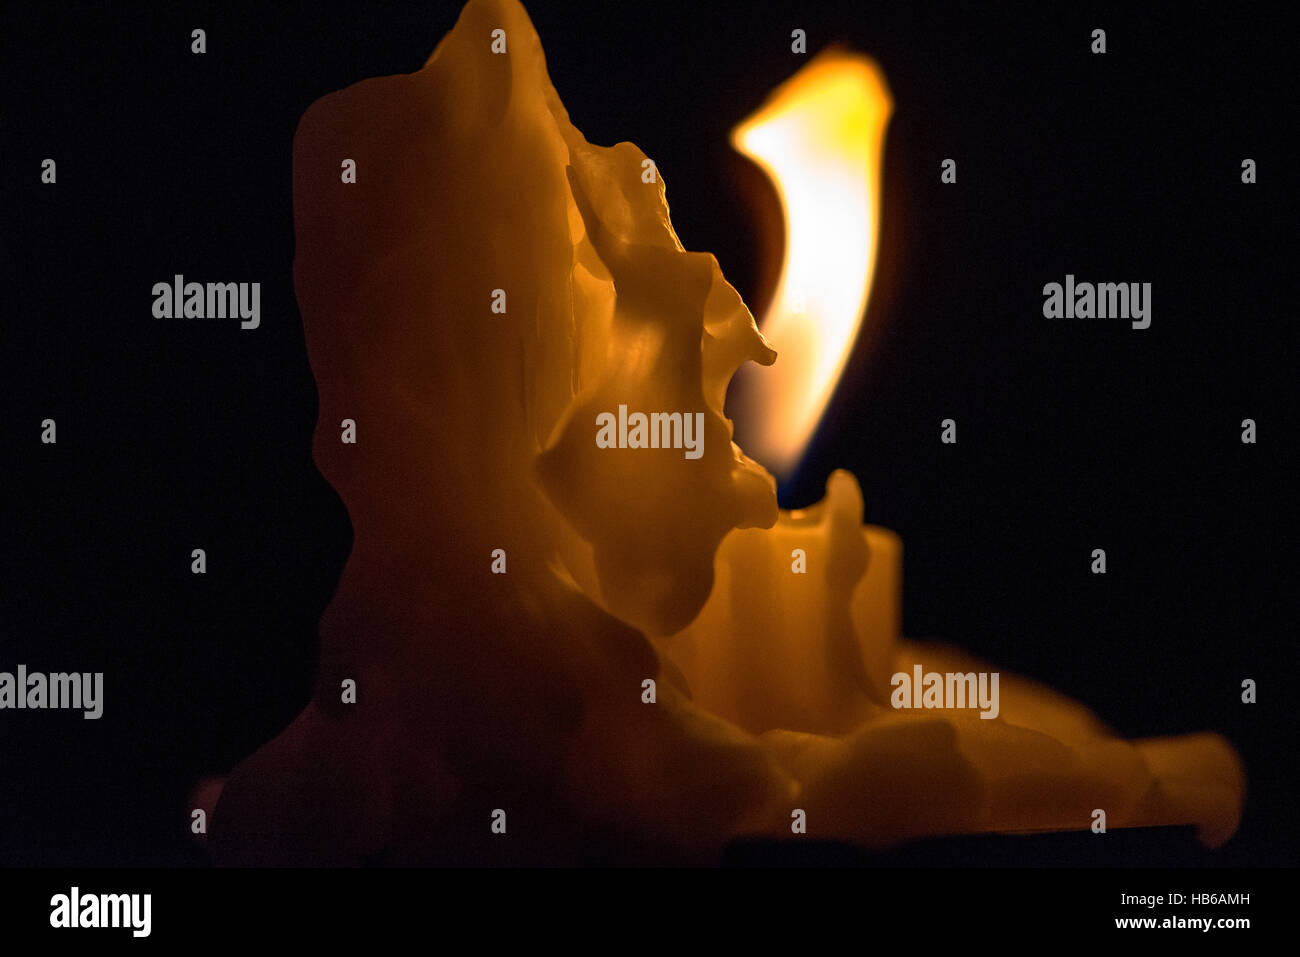 burning candle with wax Stock Photo